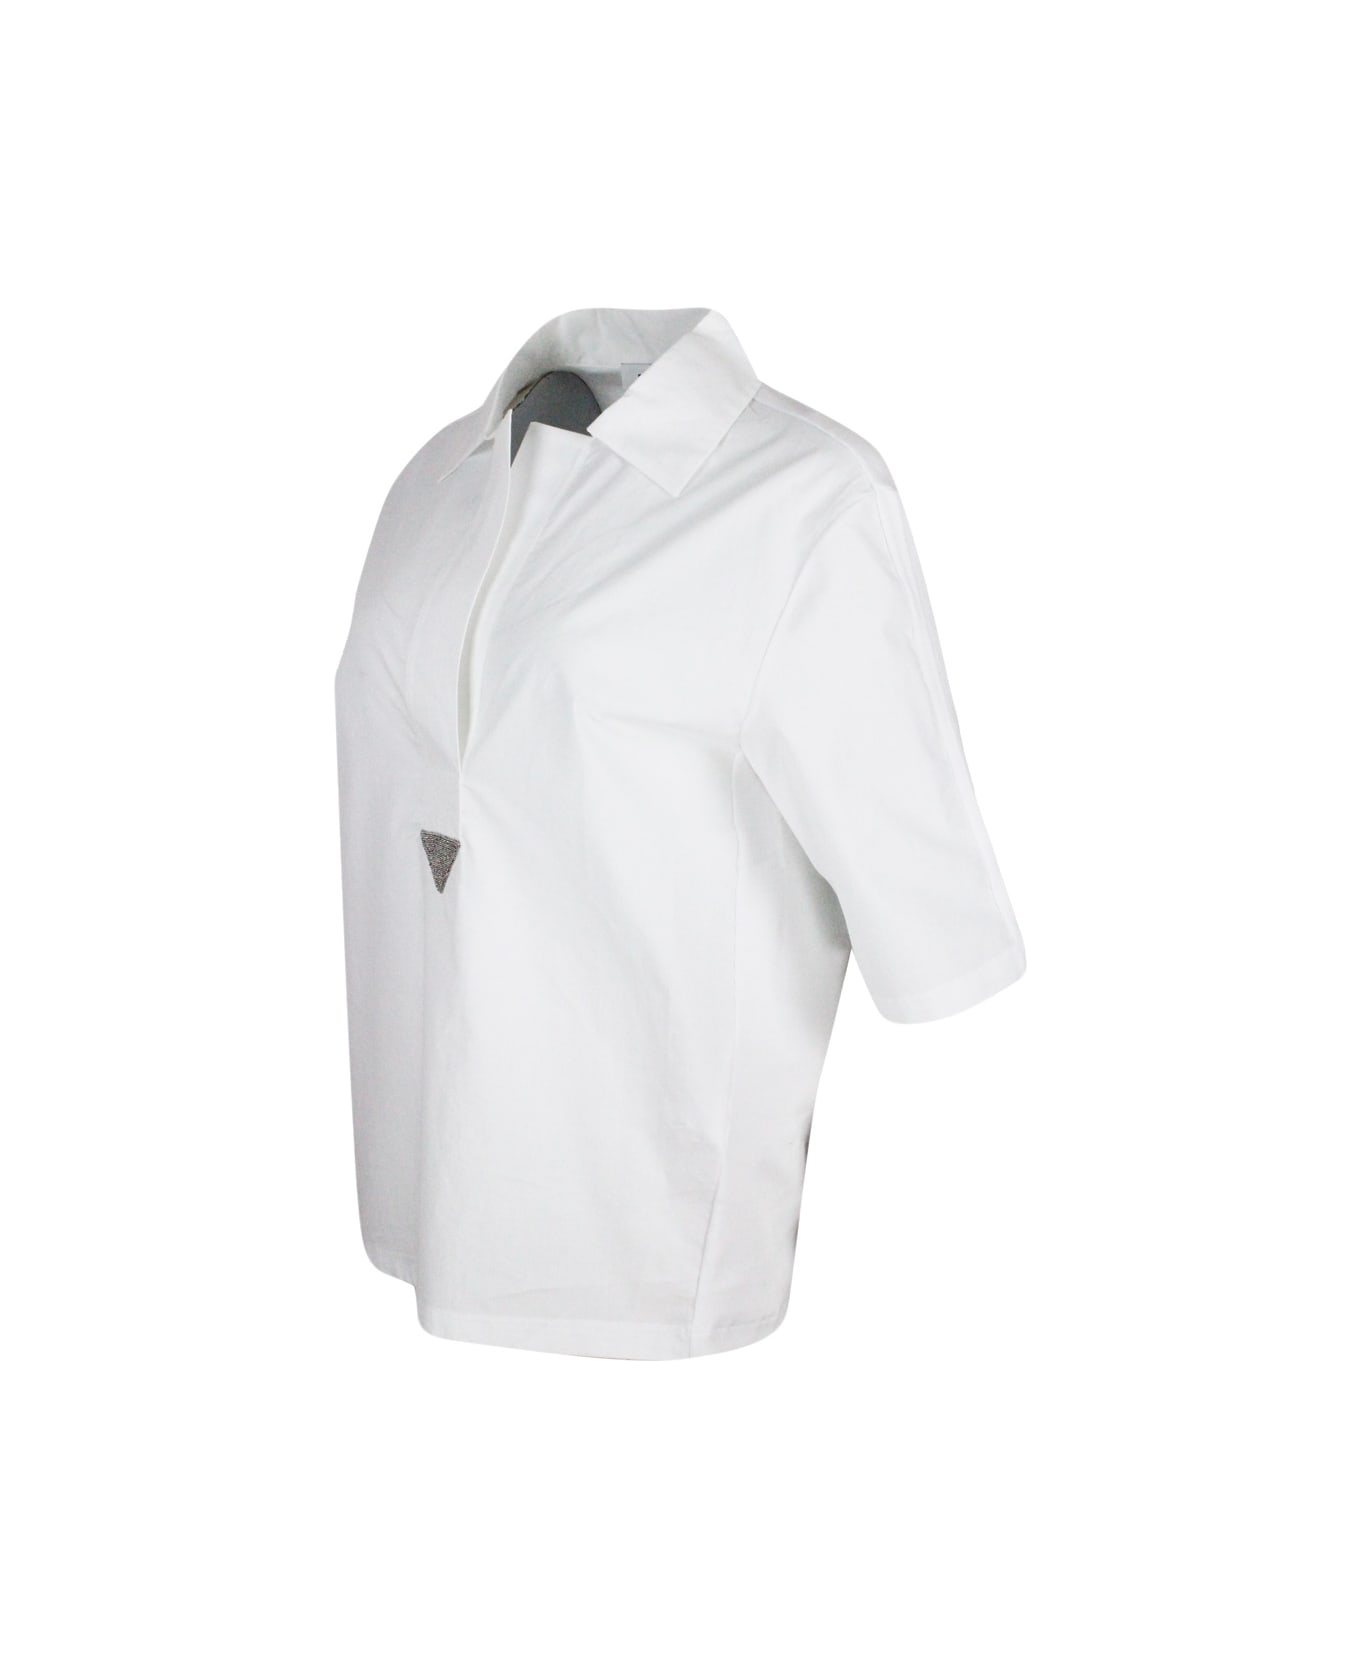 Fabiana Filippi Short-sleeved Polo T-shirt With Collar Made Of Jersey Cotton On The Front And Ribbed On The Back. Point Of Light On The Neckline - White